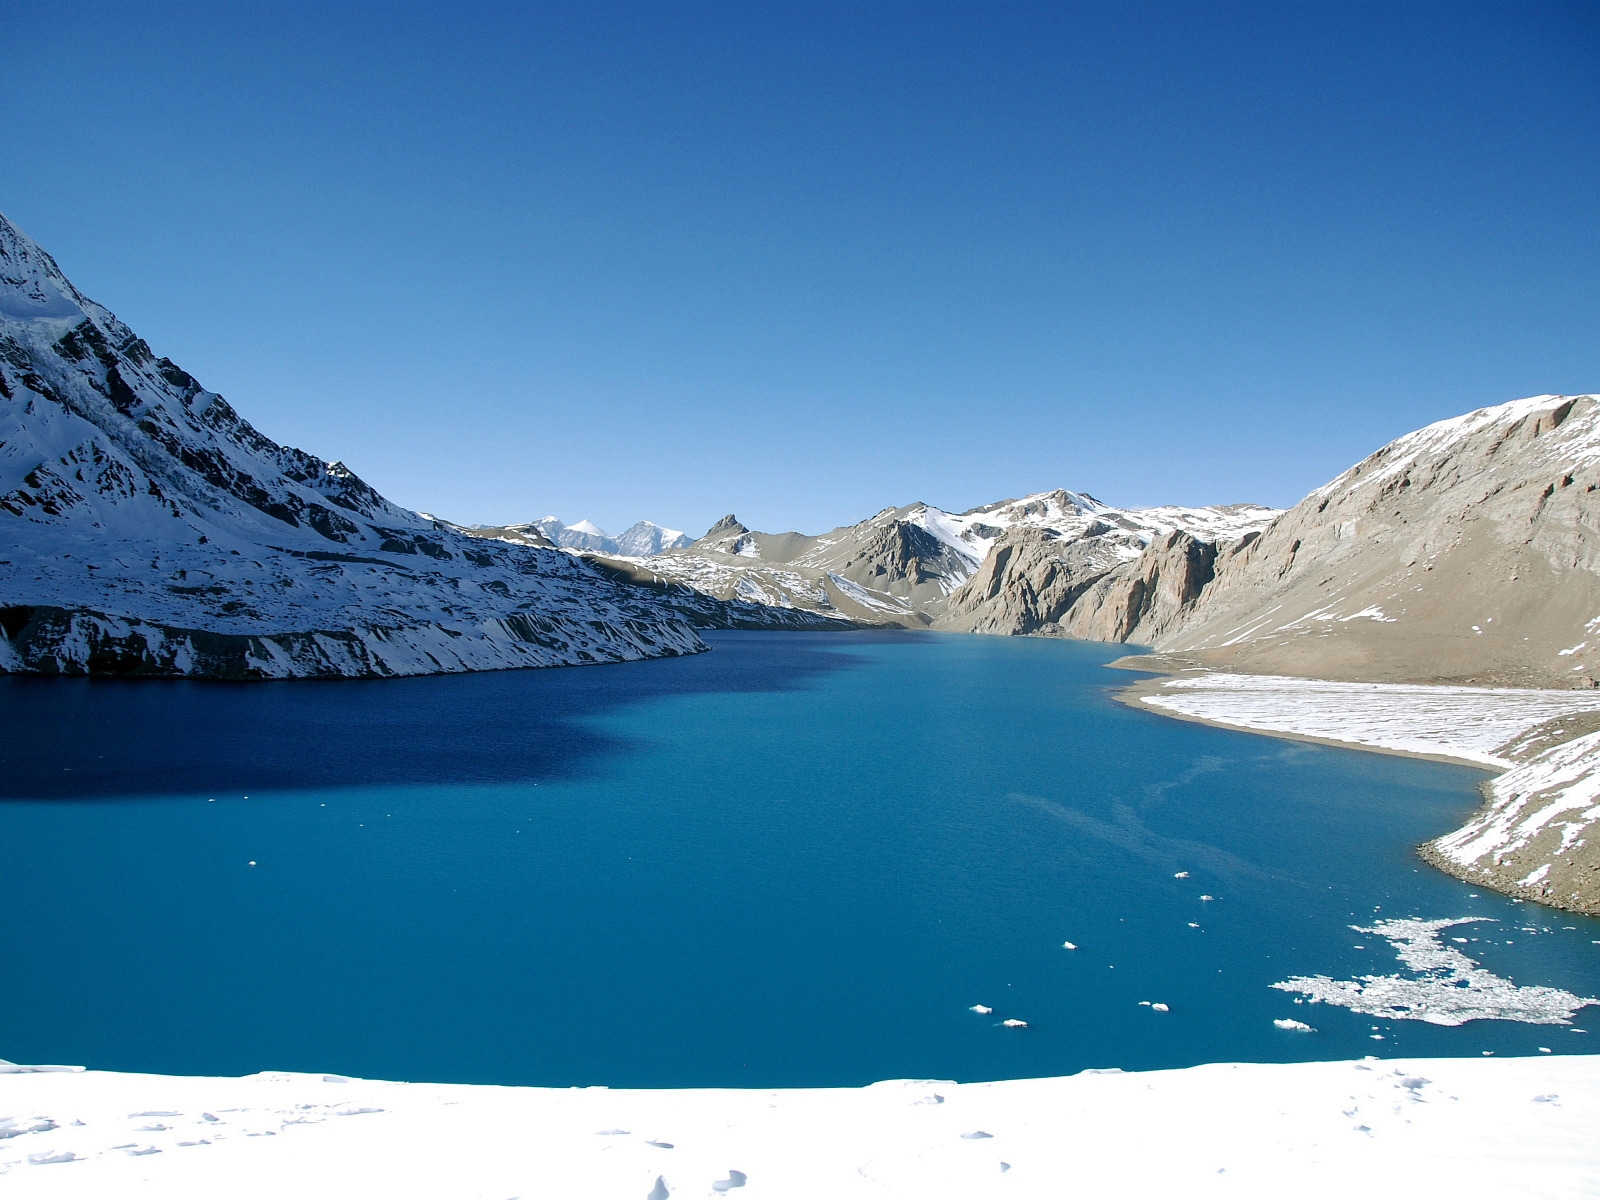 Tilicho Lake View for 1600 x 1200 resolution